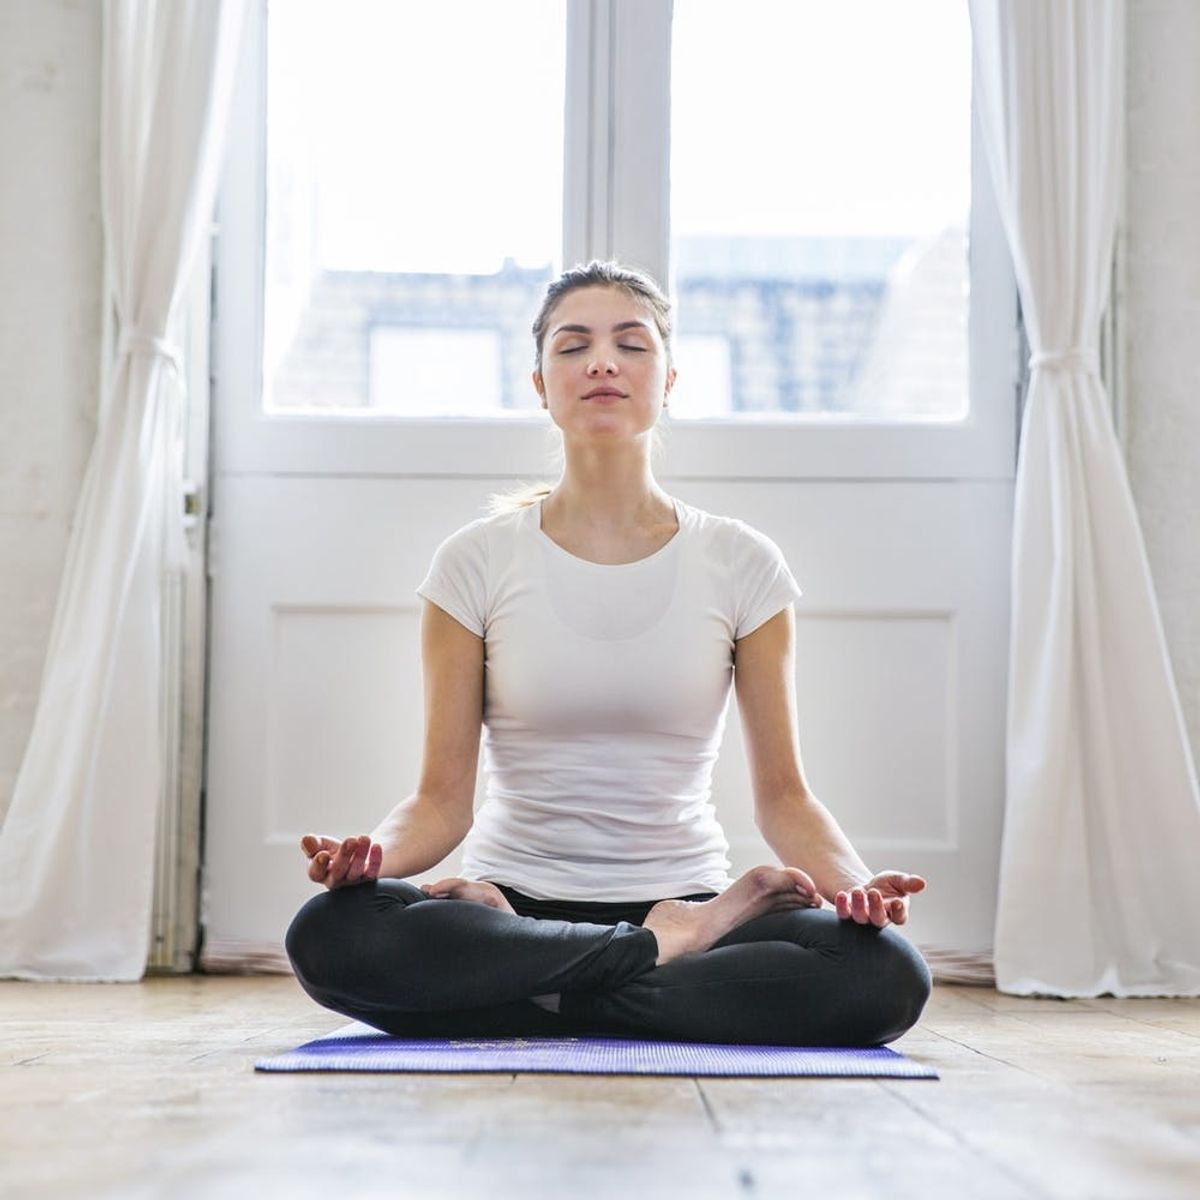 Why Starting a Meditation Habit Now Could Be a Game Changer Later in Life